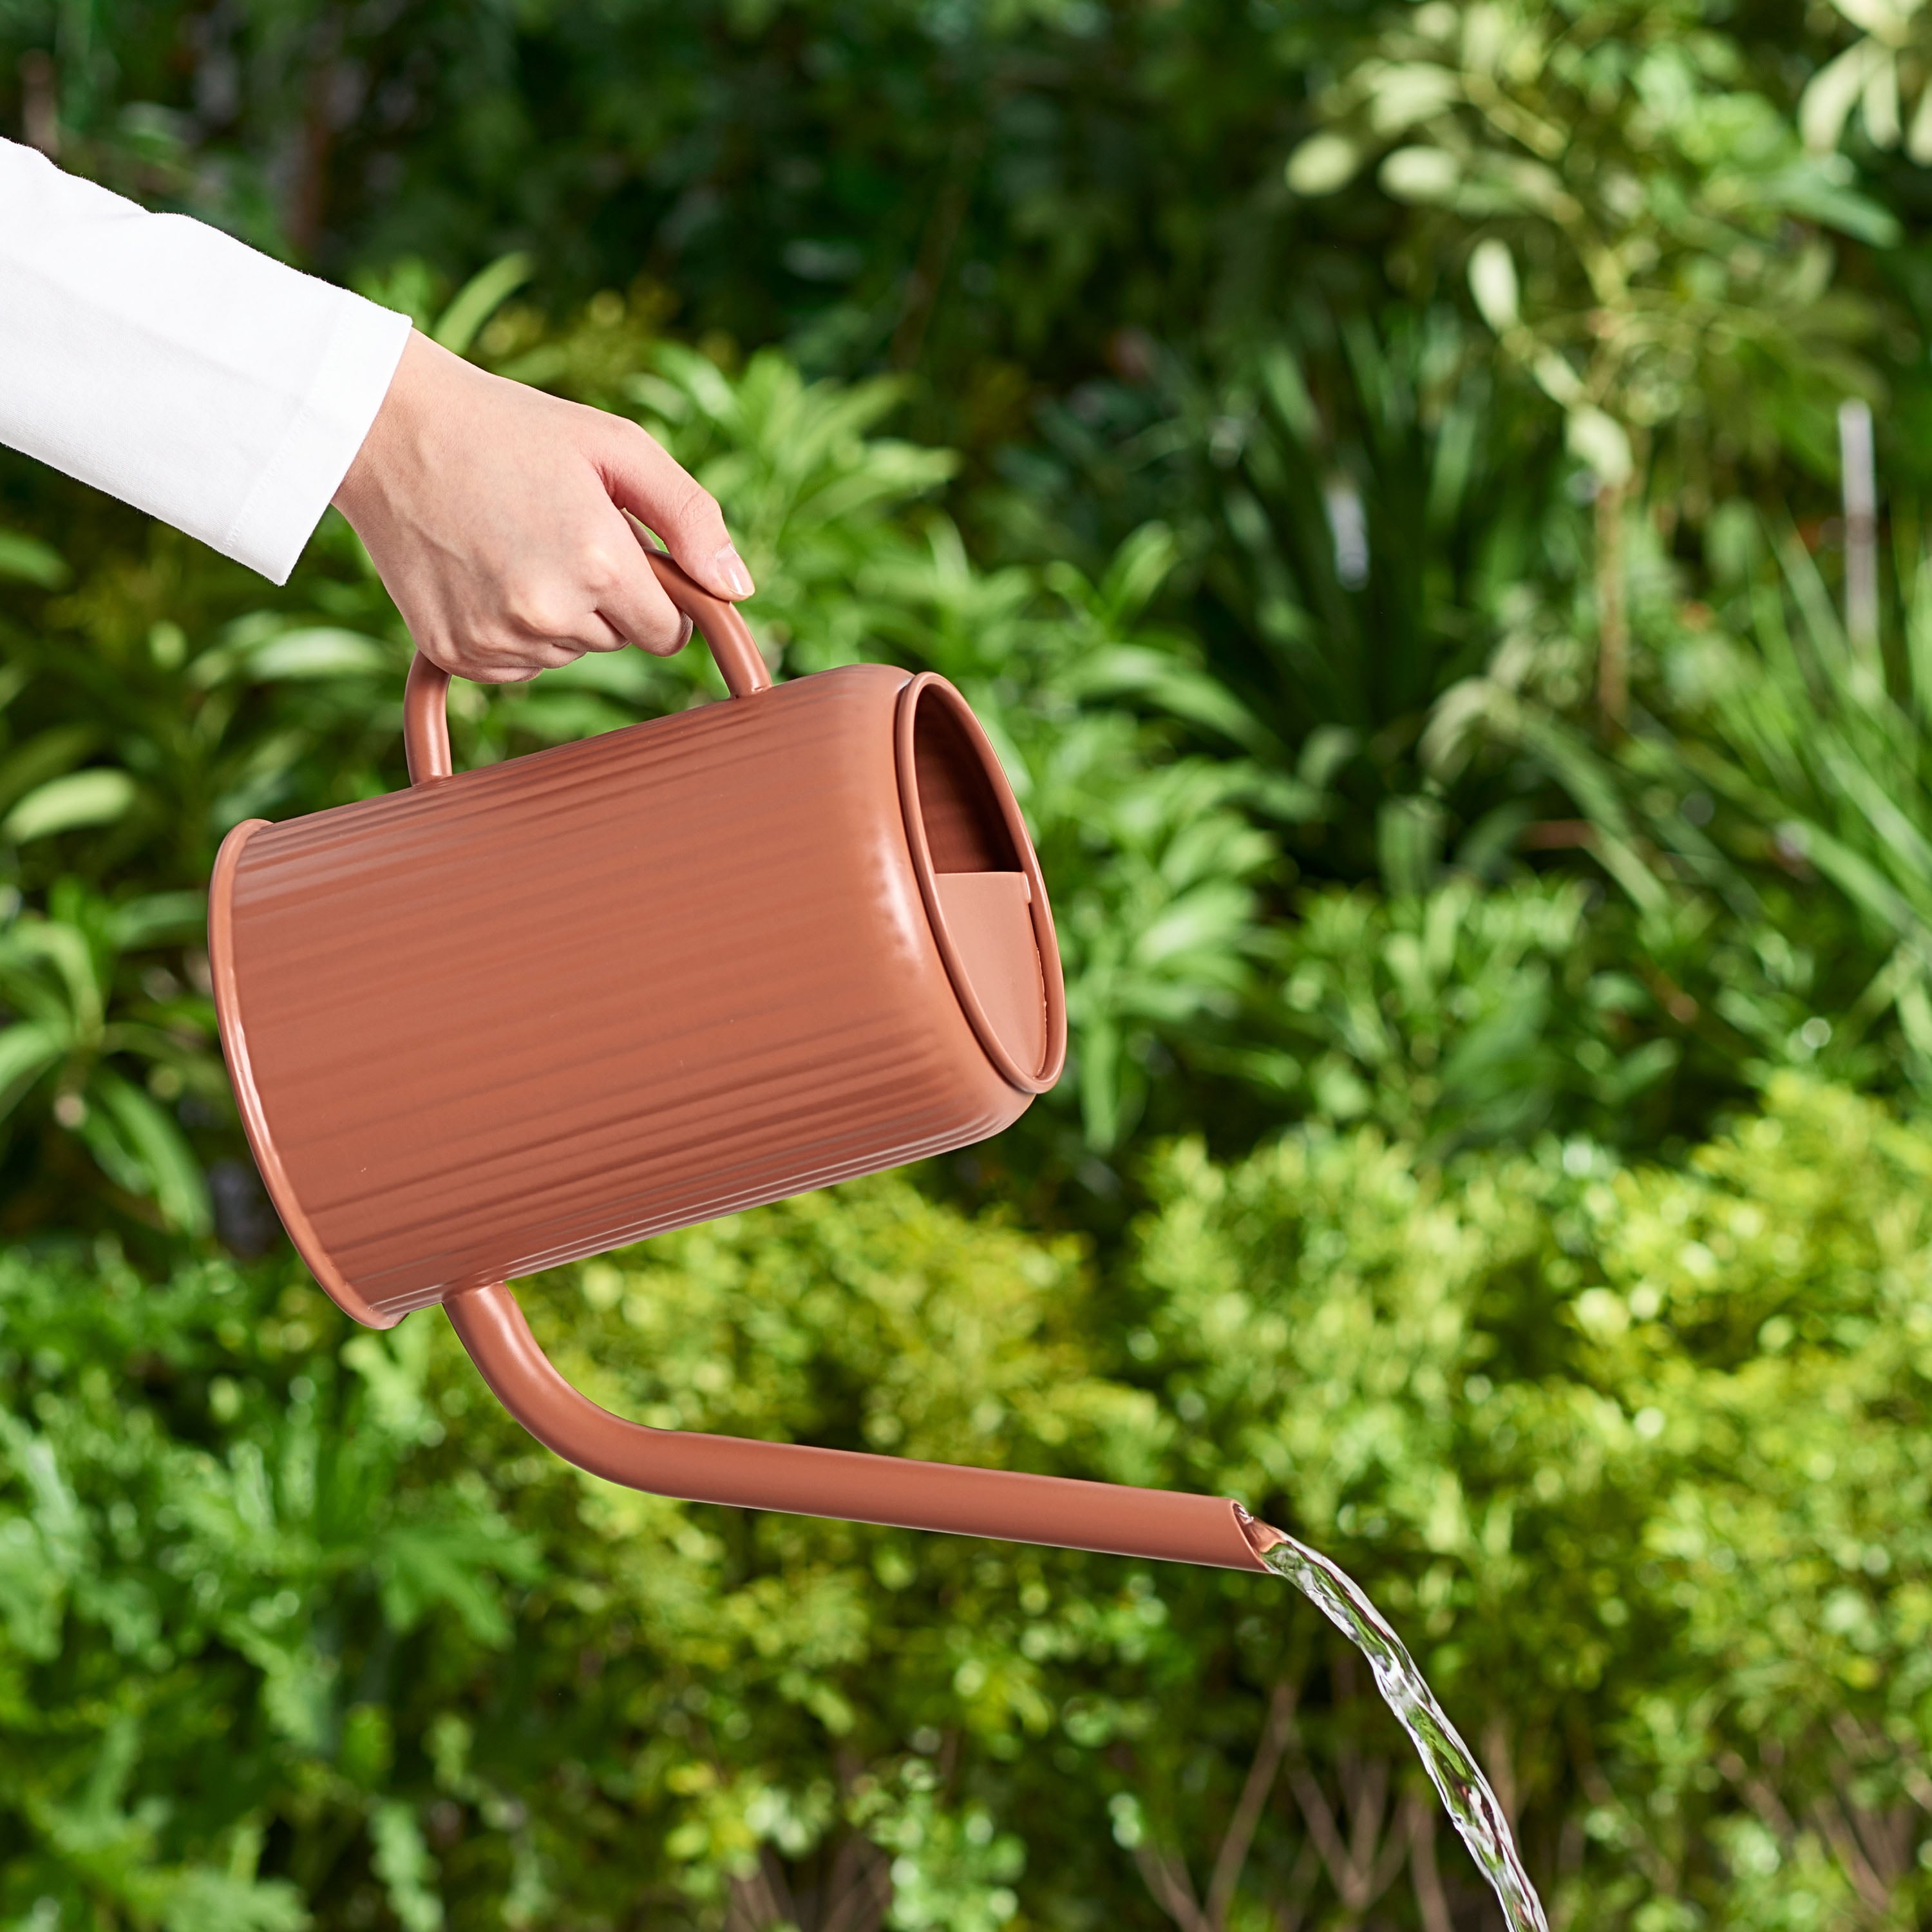 Better Homes and Gardens Copper Colors Watering Can 0.71 Gal, Orange